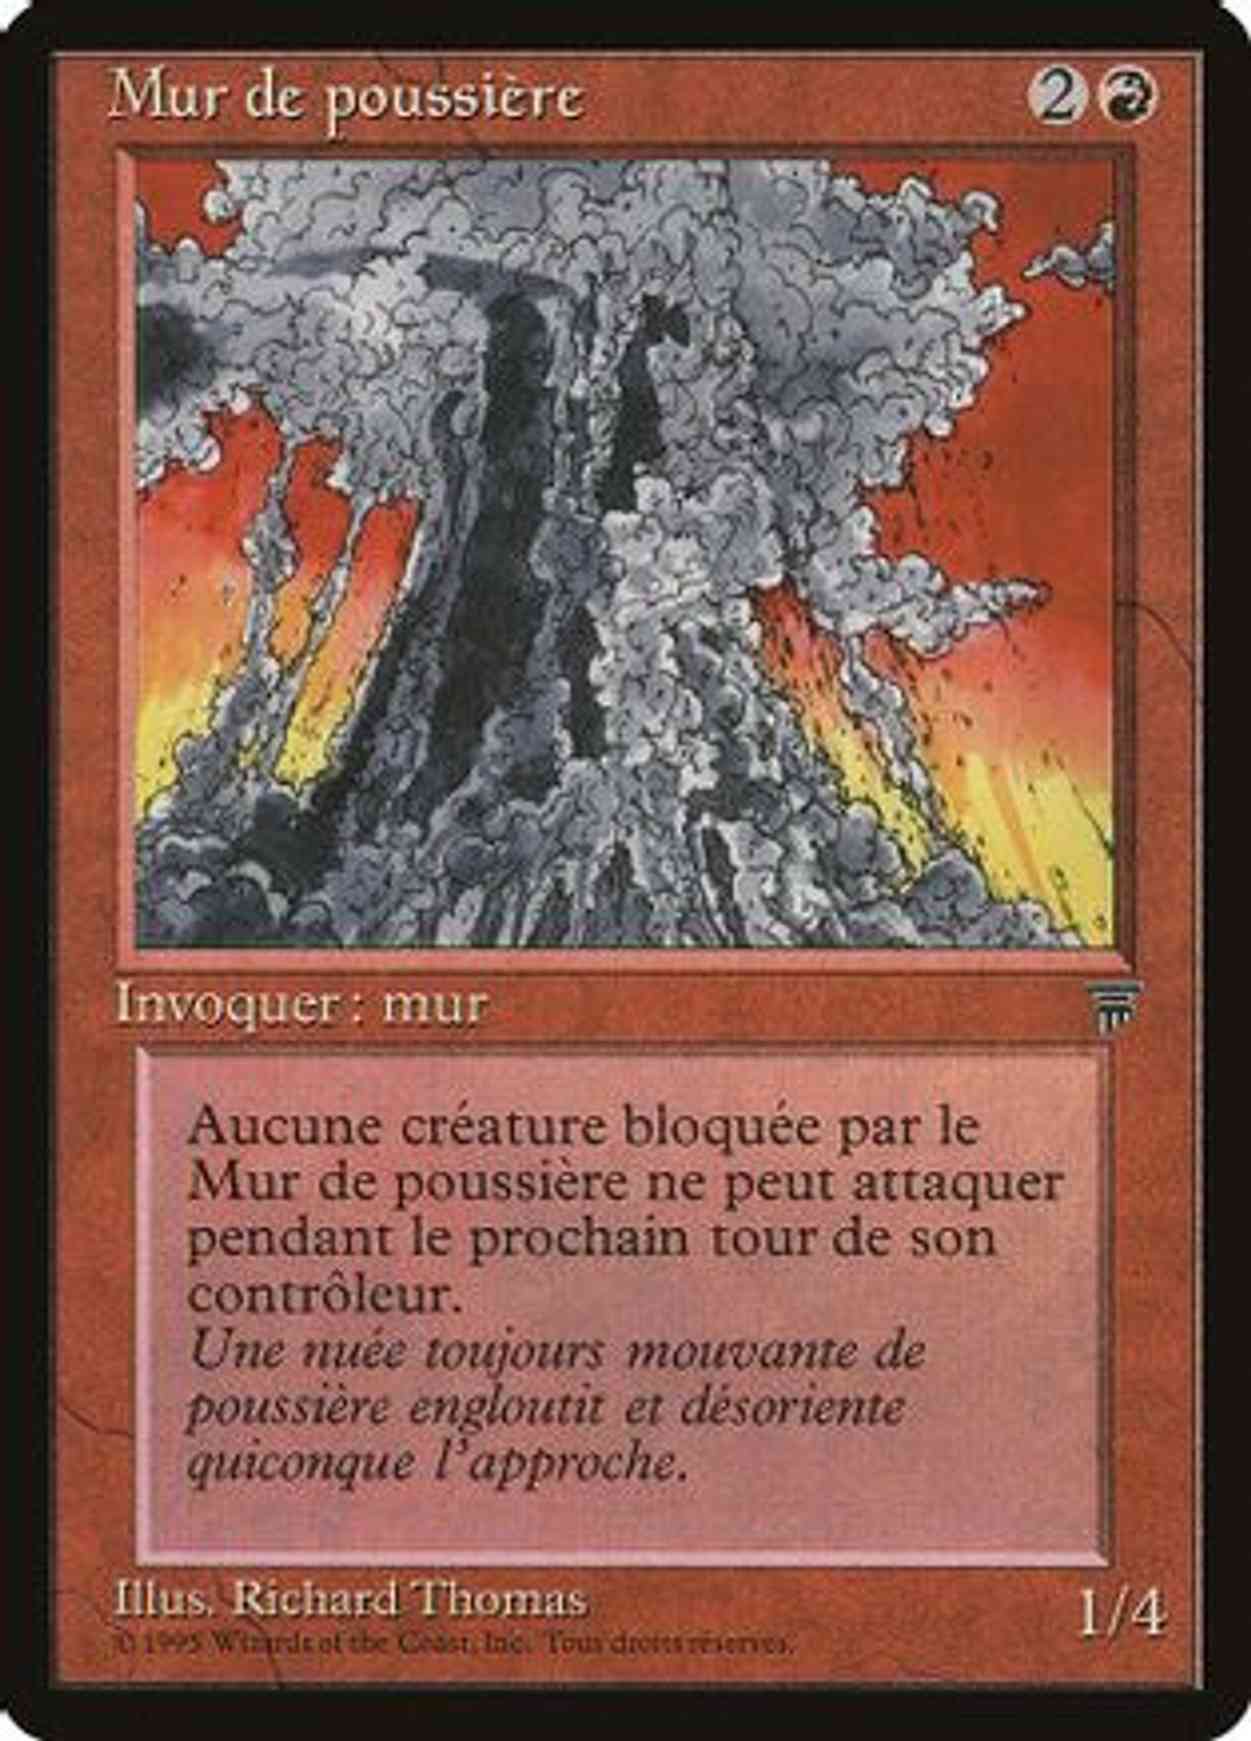 Wall of Dust (French) - "Mur de poussiere" magic card front